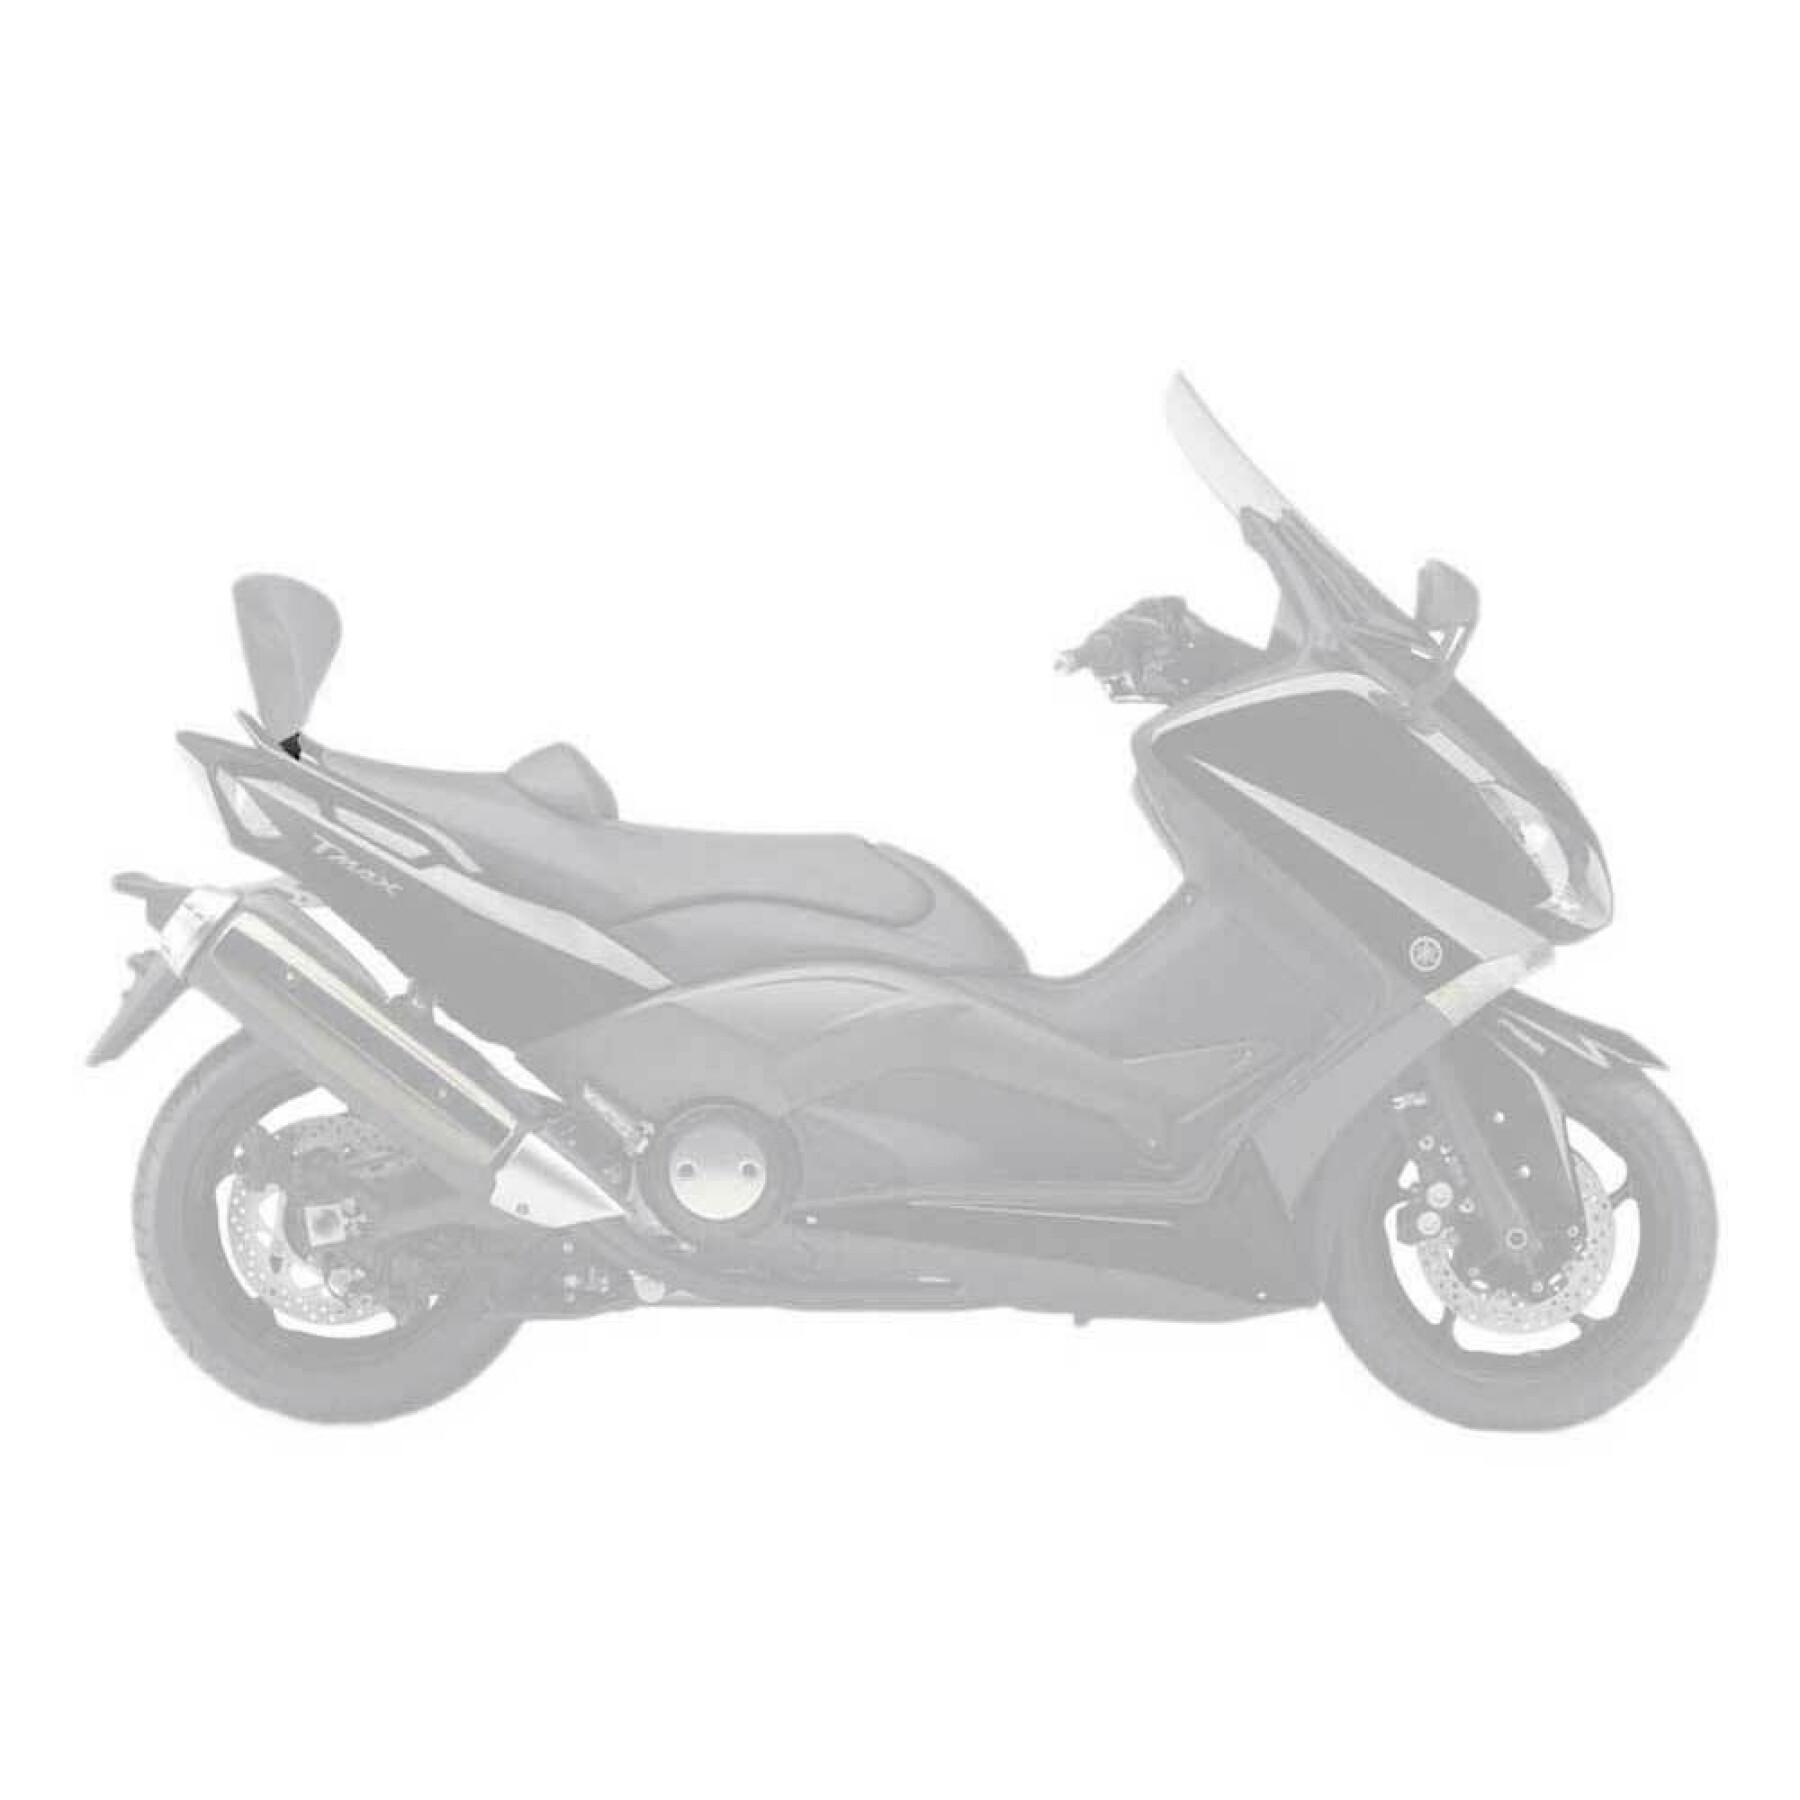 Attacco per schienale scooter Shad yamaha tmax 530